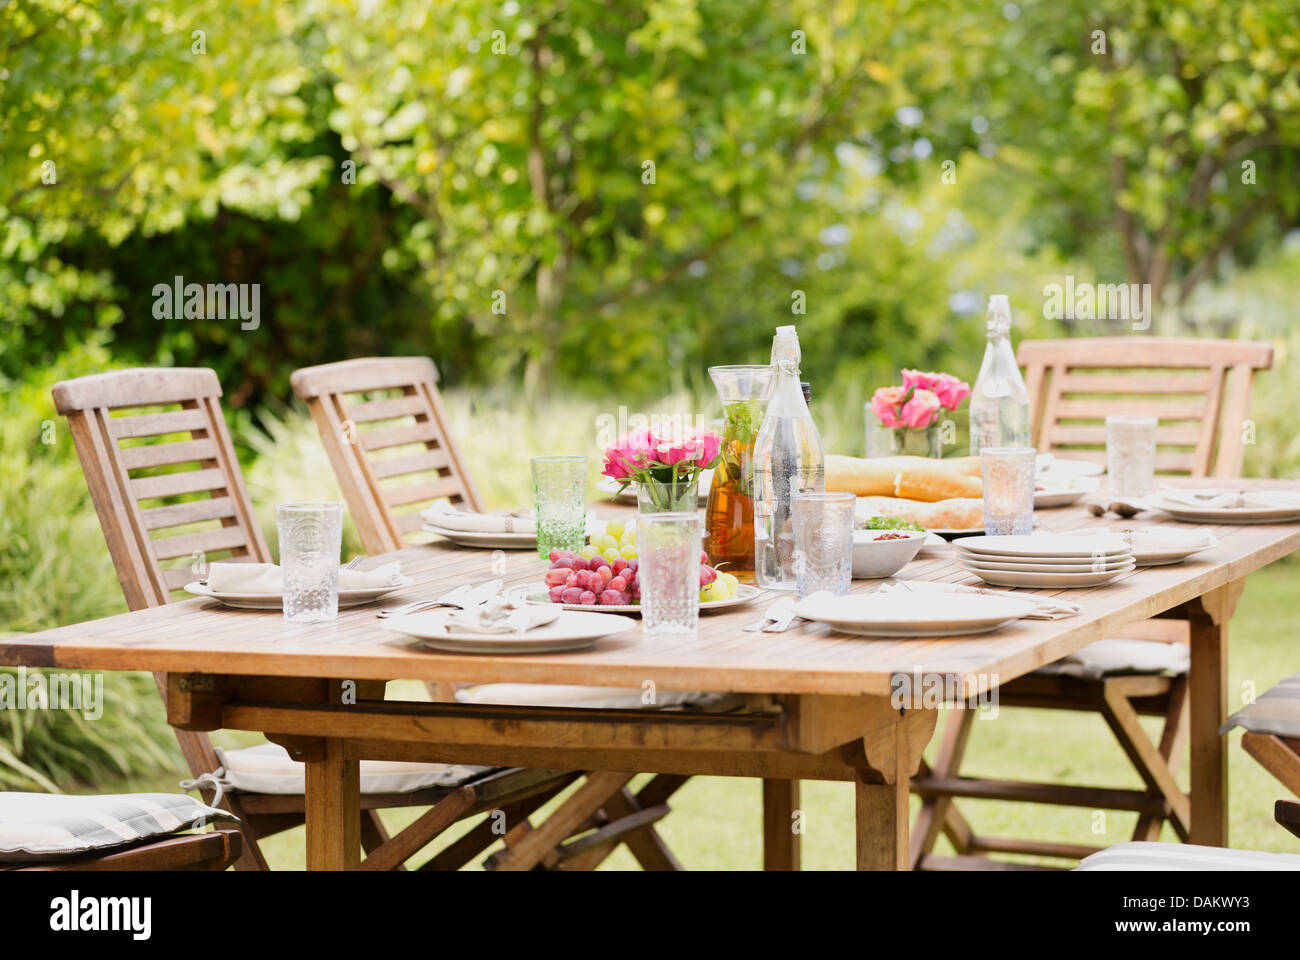 Set table in backyard Banque D'Images